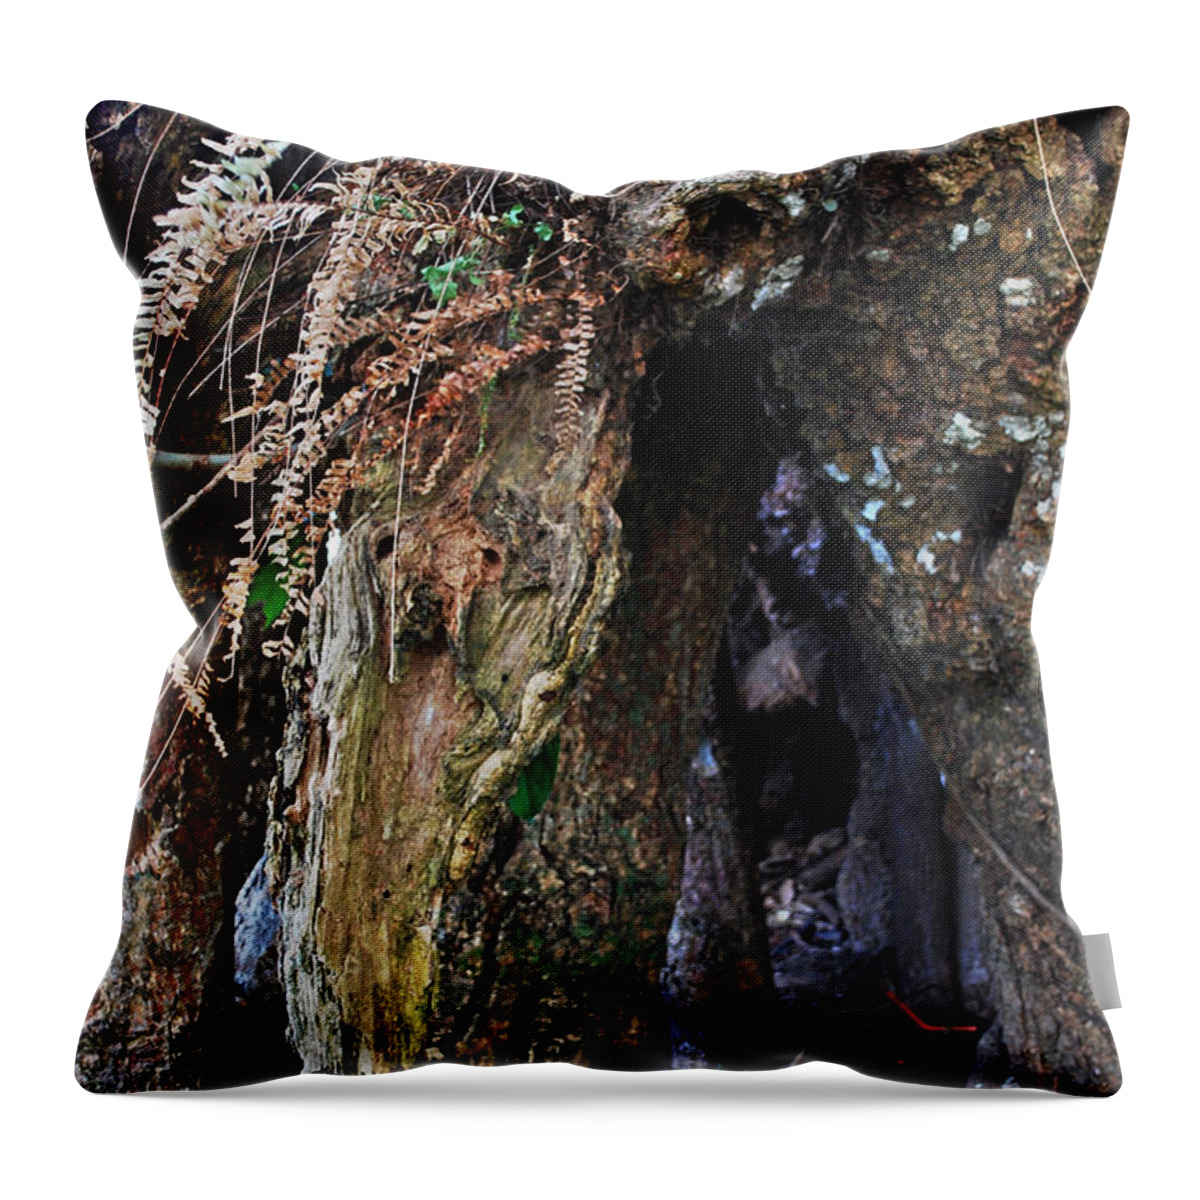 Road Throw Pillow featuring the photograph Gras by Rebeca Segura